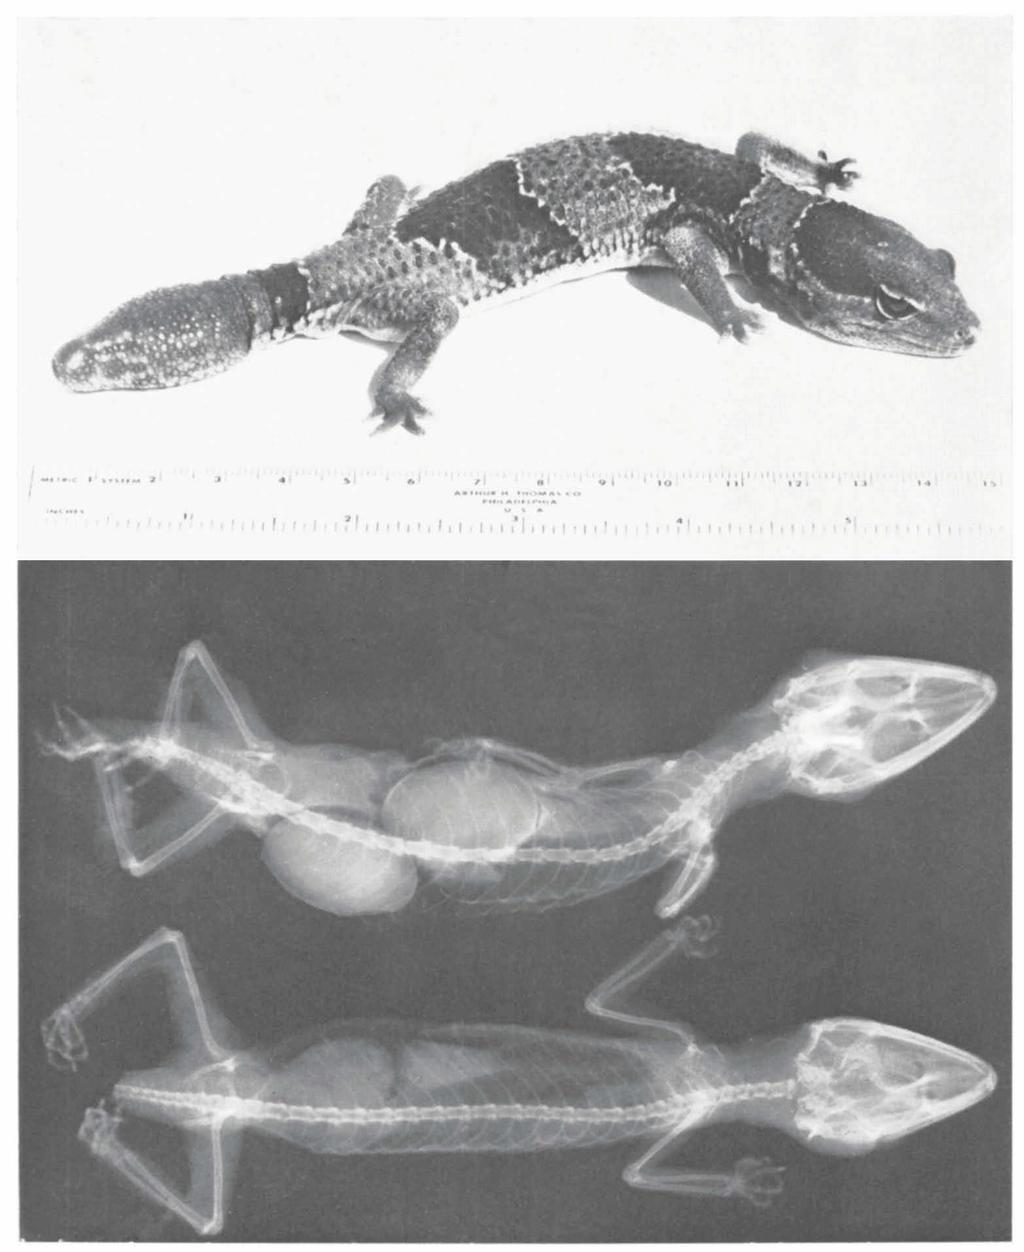 ZOOLOGISCHE MEDEDELINGEN 47 07) PL. 1 Top fig. Photograph of a live male of Hemitheconyx caudicinctus. (Ruler with centimetres towards animal, inches towards viewer). Bottom fig.